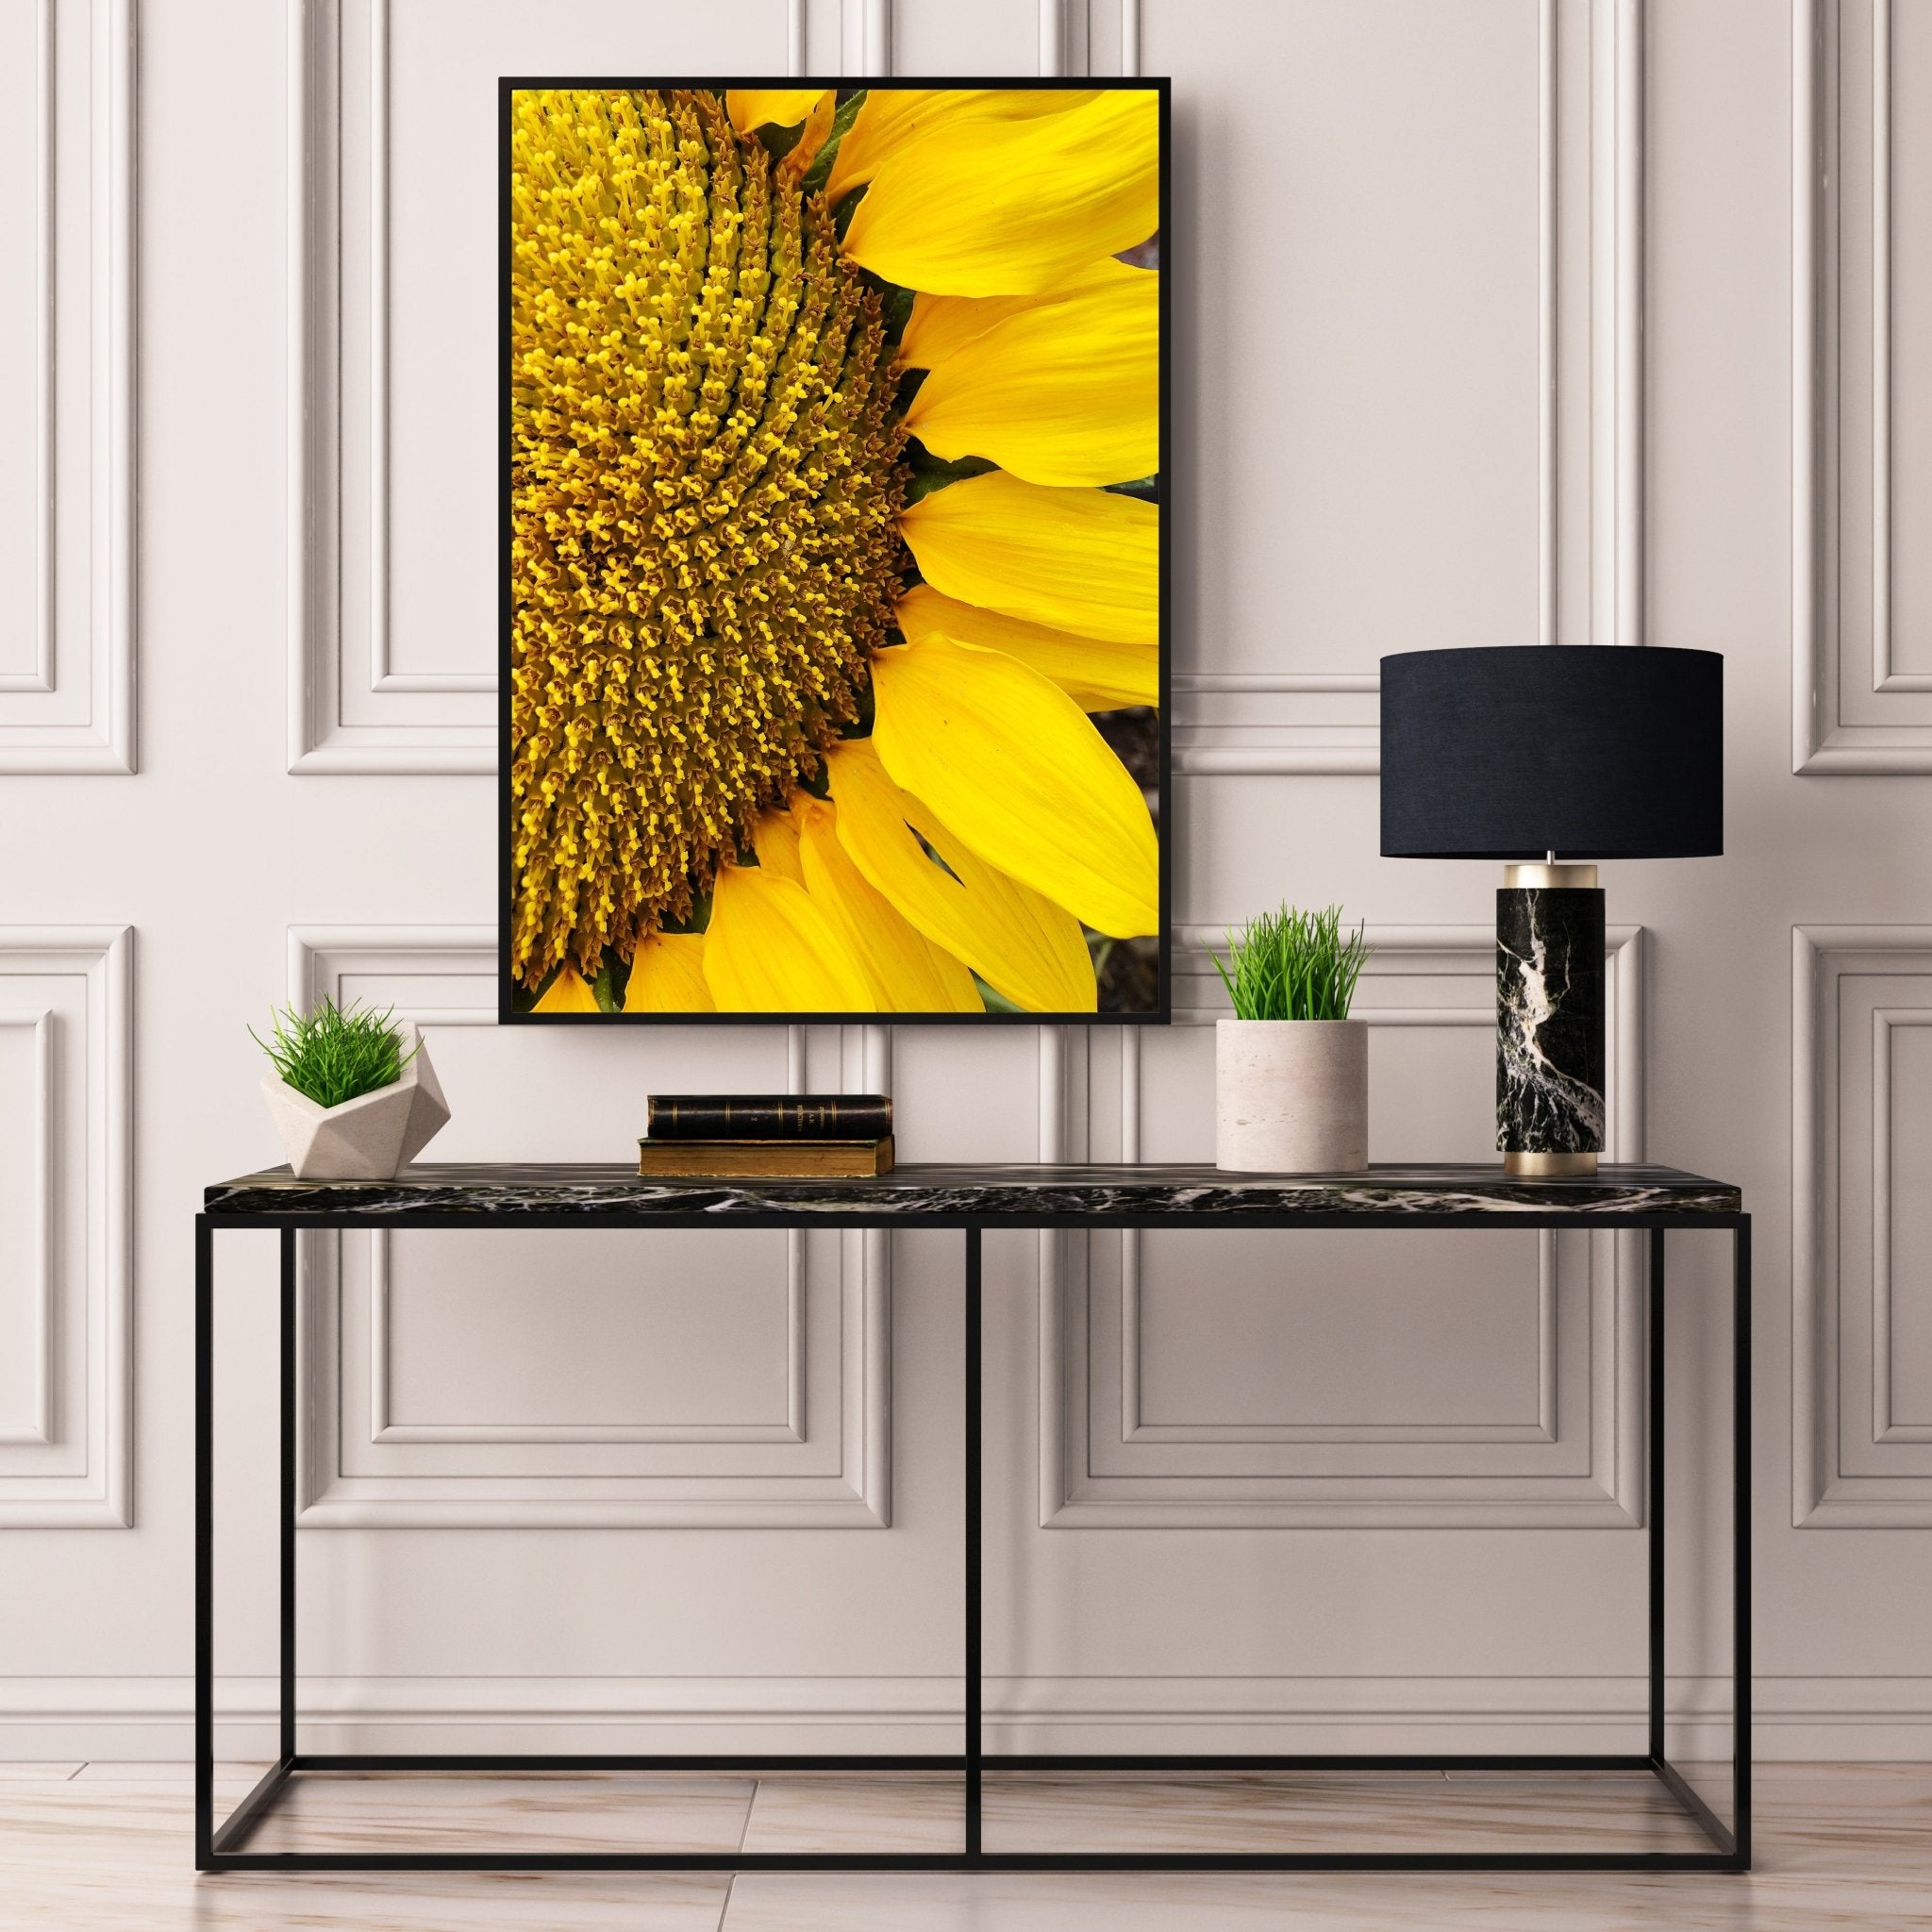 Sunflower Upclose - D'Luxe Prints